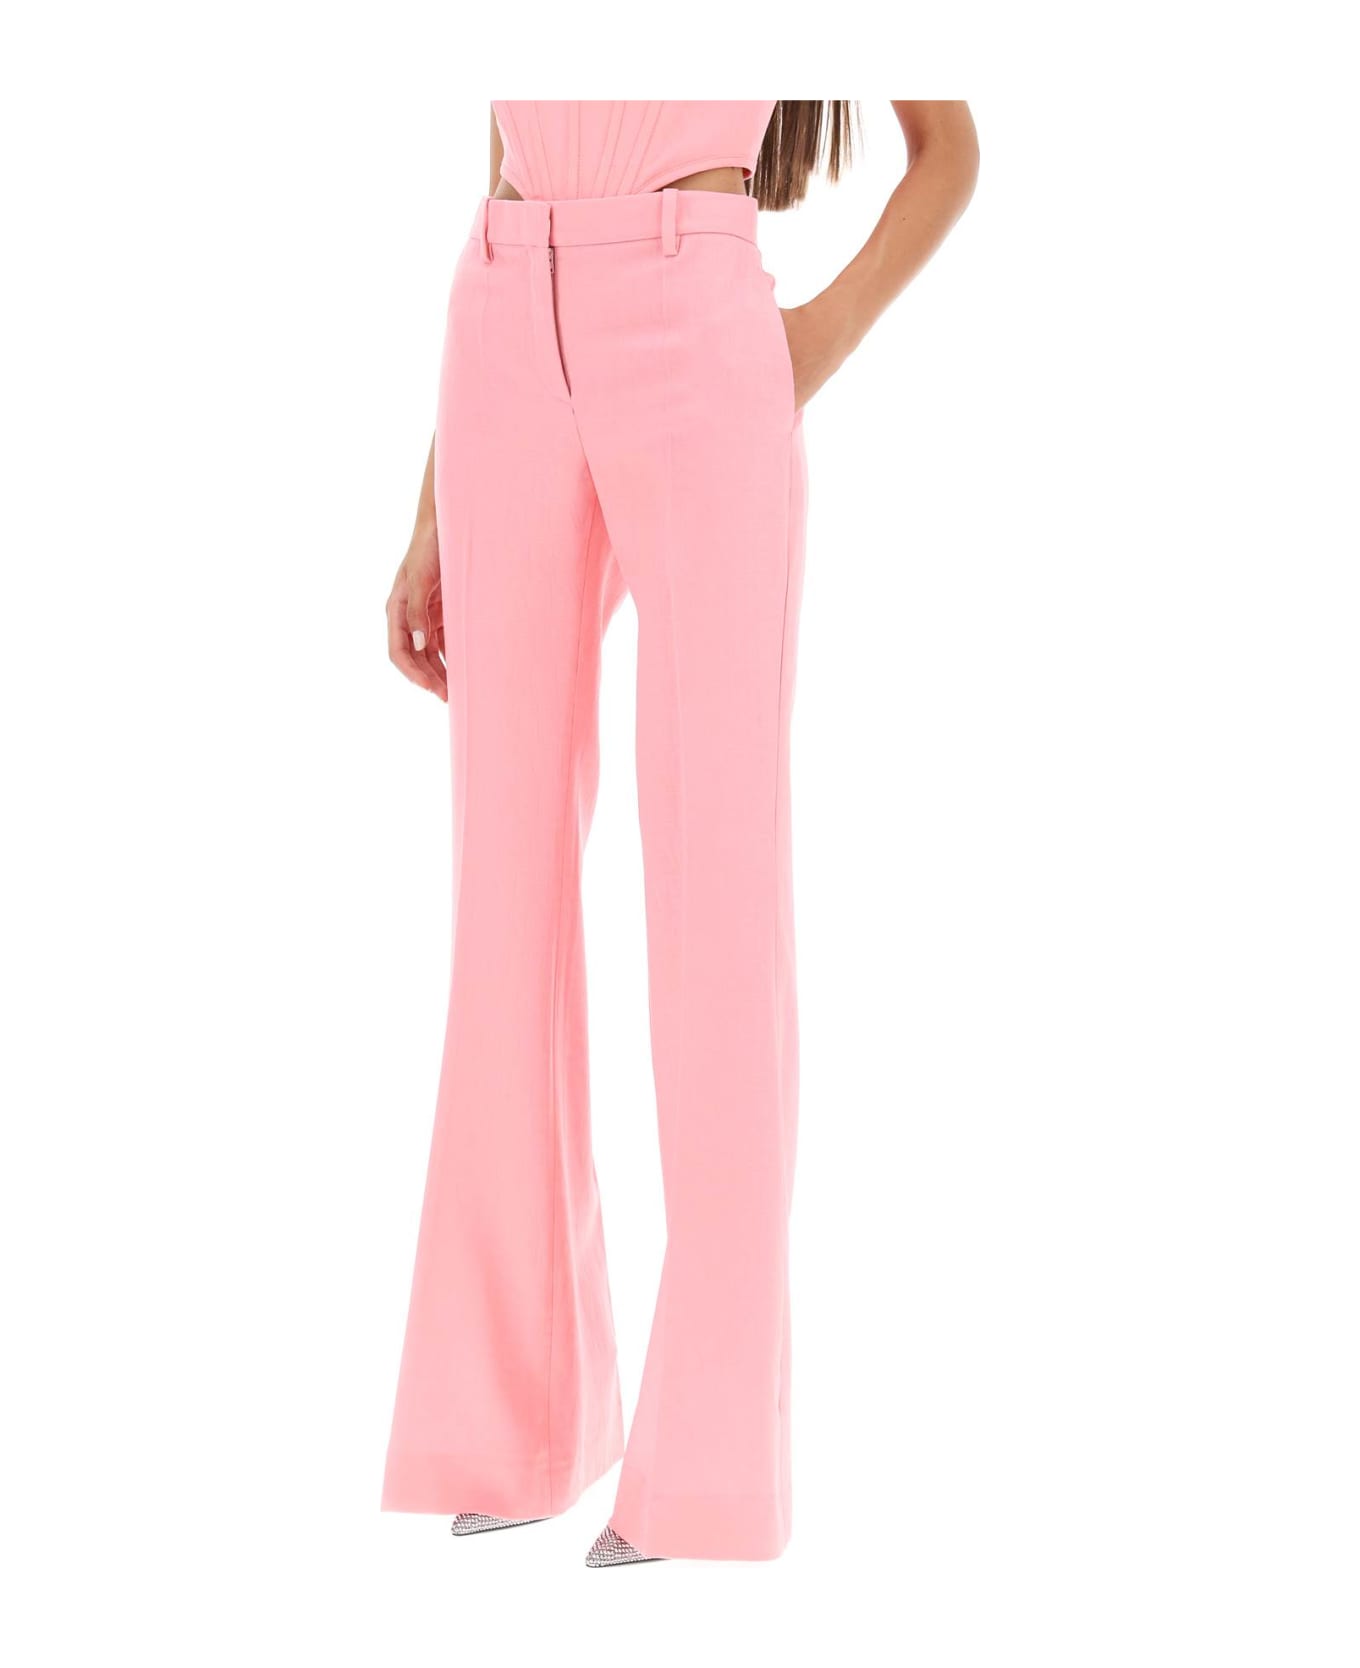 Versace Flared Trousers - Pink ボトムス